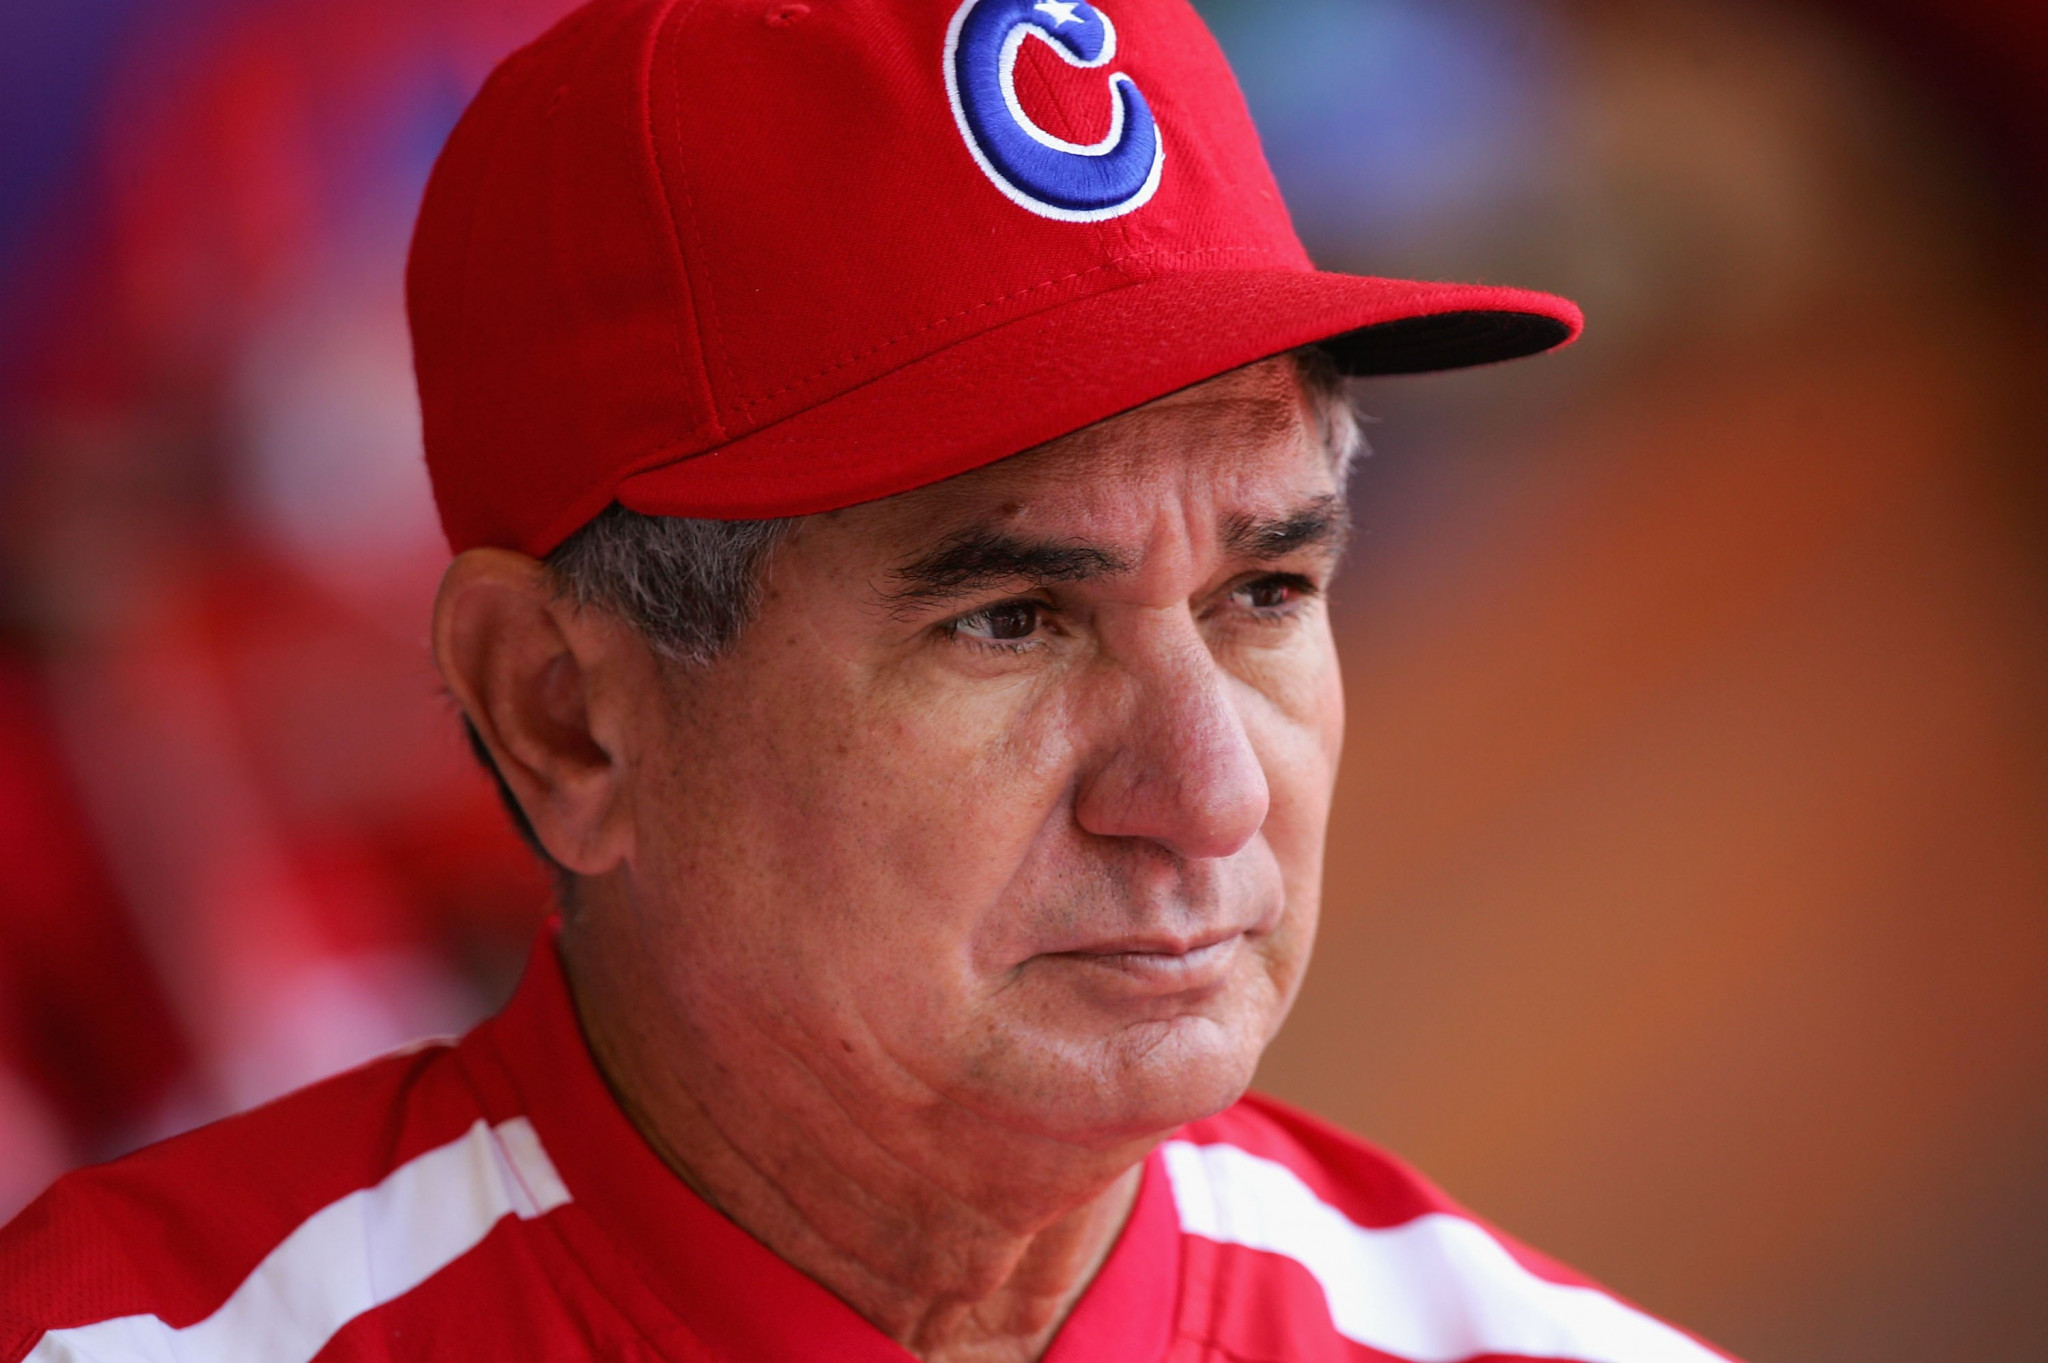 Higinio Velez was manager when Cuba won baseball gold at the Athens 2004 Olympics ©Getty Images